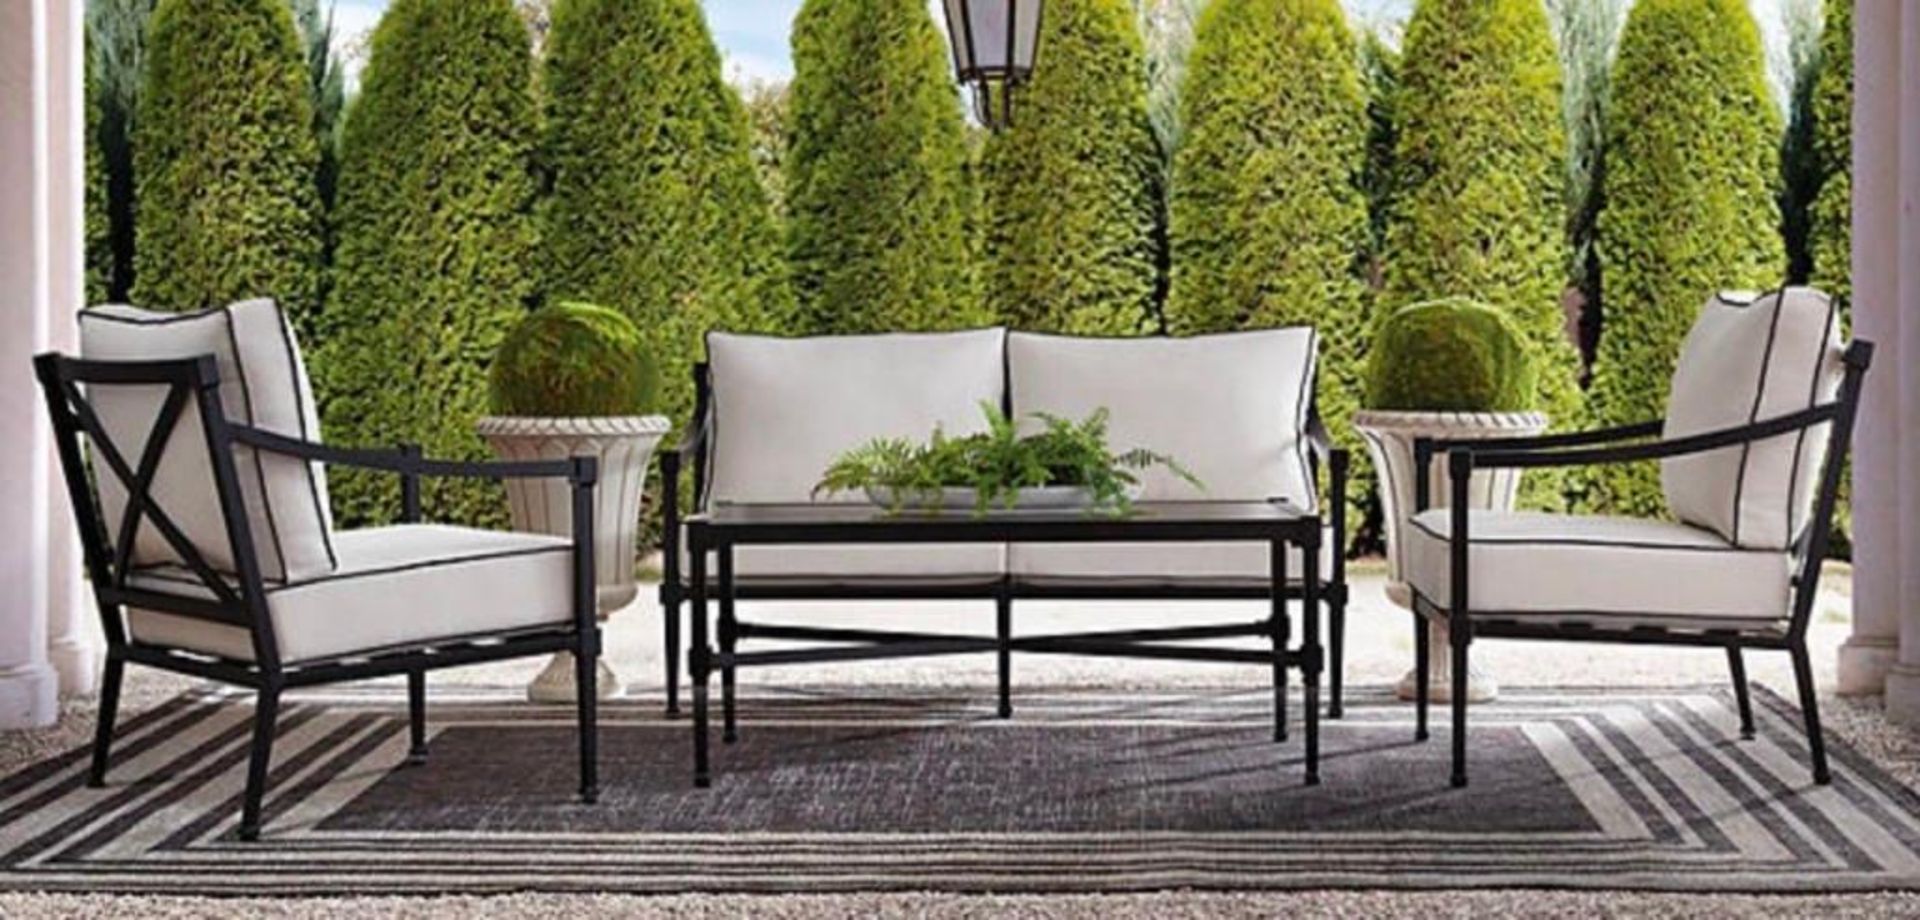 Outdoor Furniture sets - Image 5 of 8